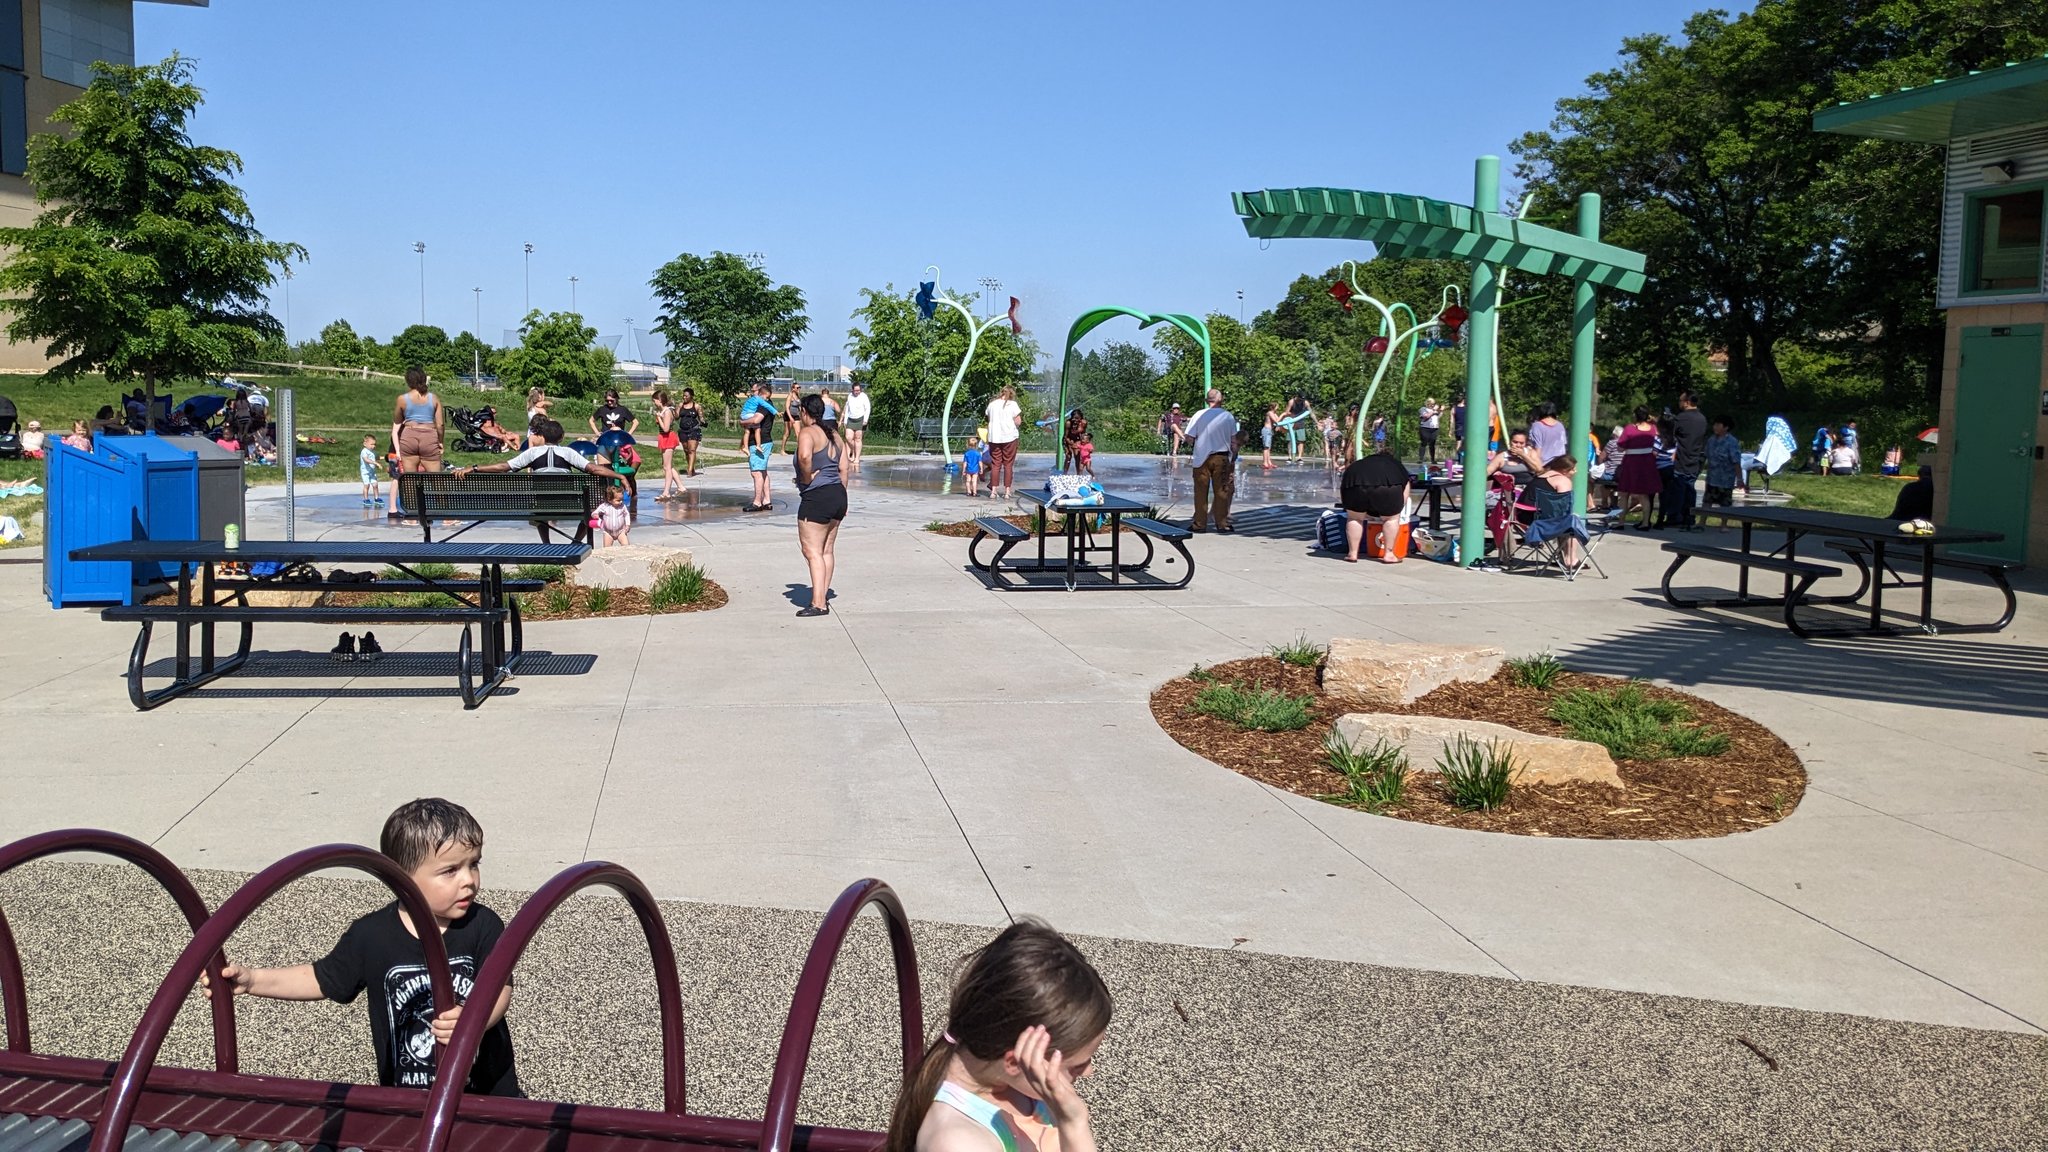 Old Geezers Of The Park That Guy on Twltter on X: "No doubt the old geezers objected to tax dollars  going to create Woodbury's amazing adaptive playground and splash pad where  it's hilarious chaos with parents and